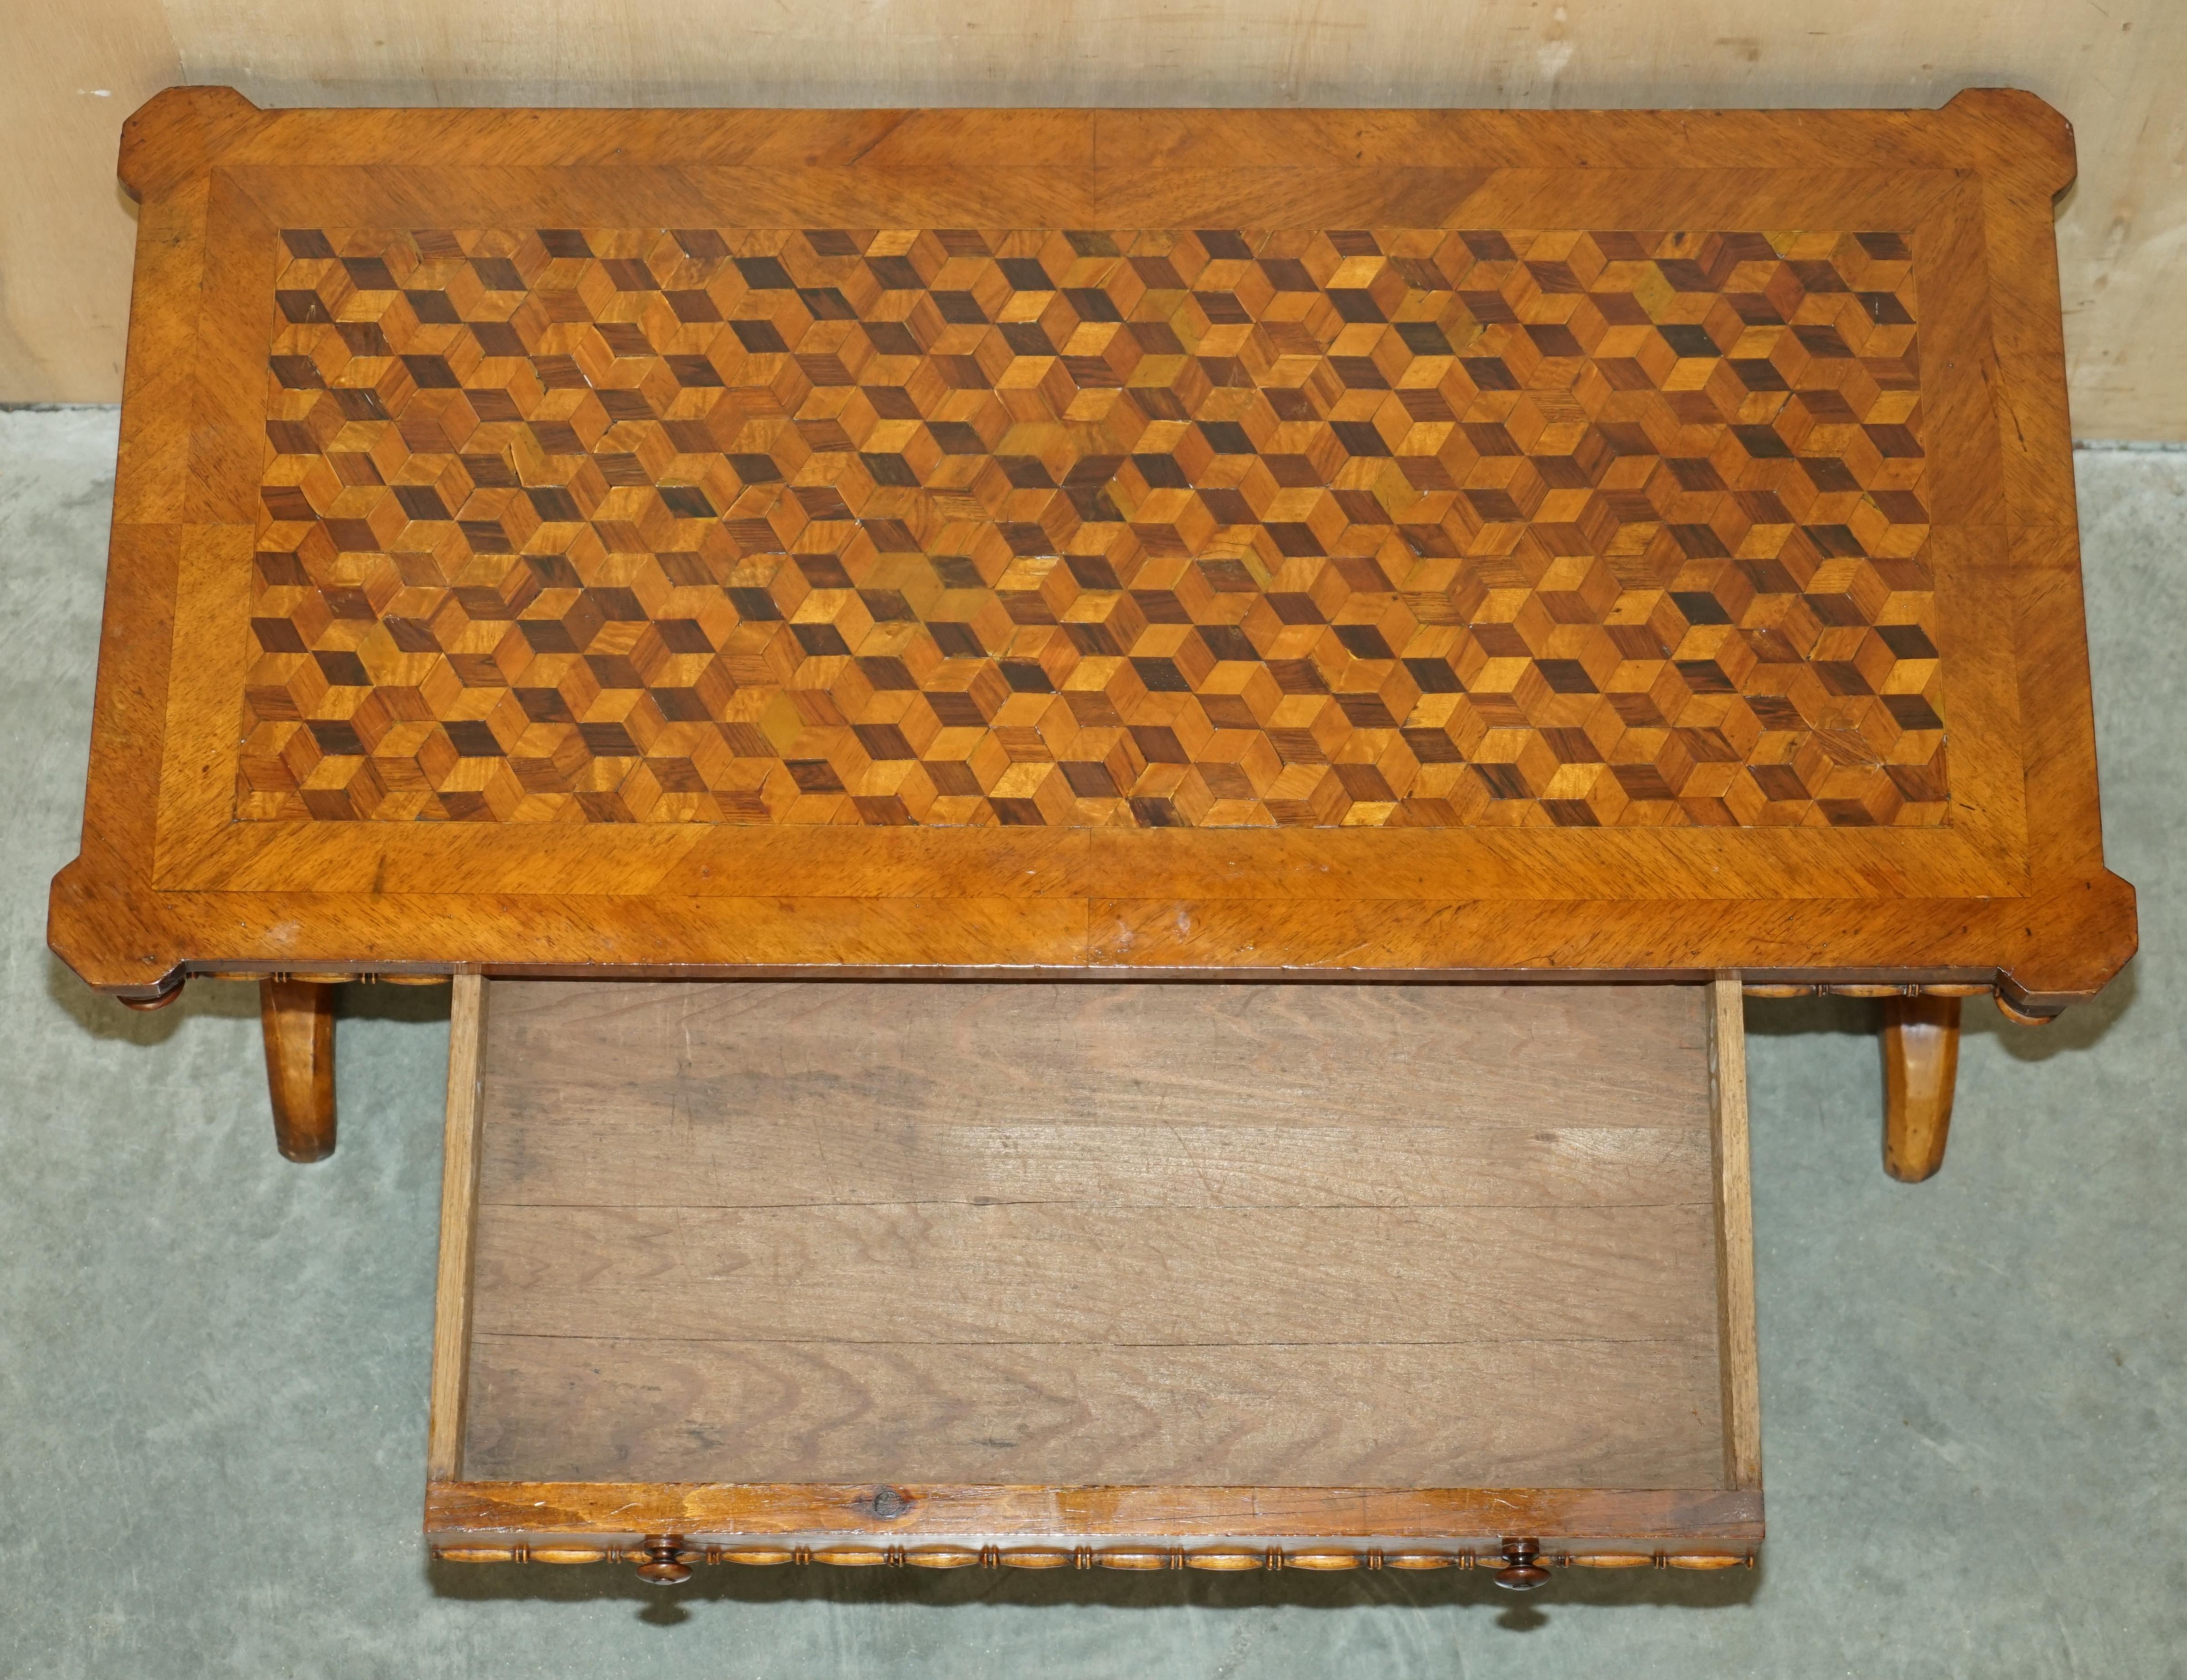 SUBLIME ANTiQUE 19TH CENTURY SPECIMEN GEOMETRIC SAMPLE WOOD INLAID COFFEE TABLE For Sale 13